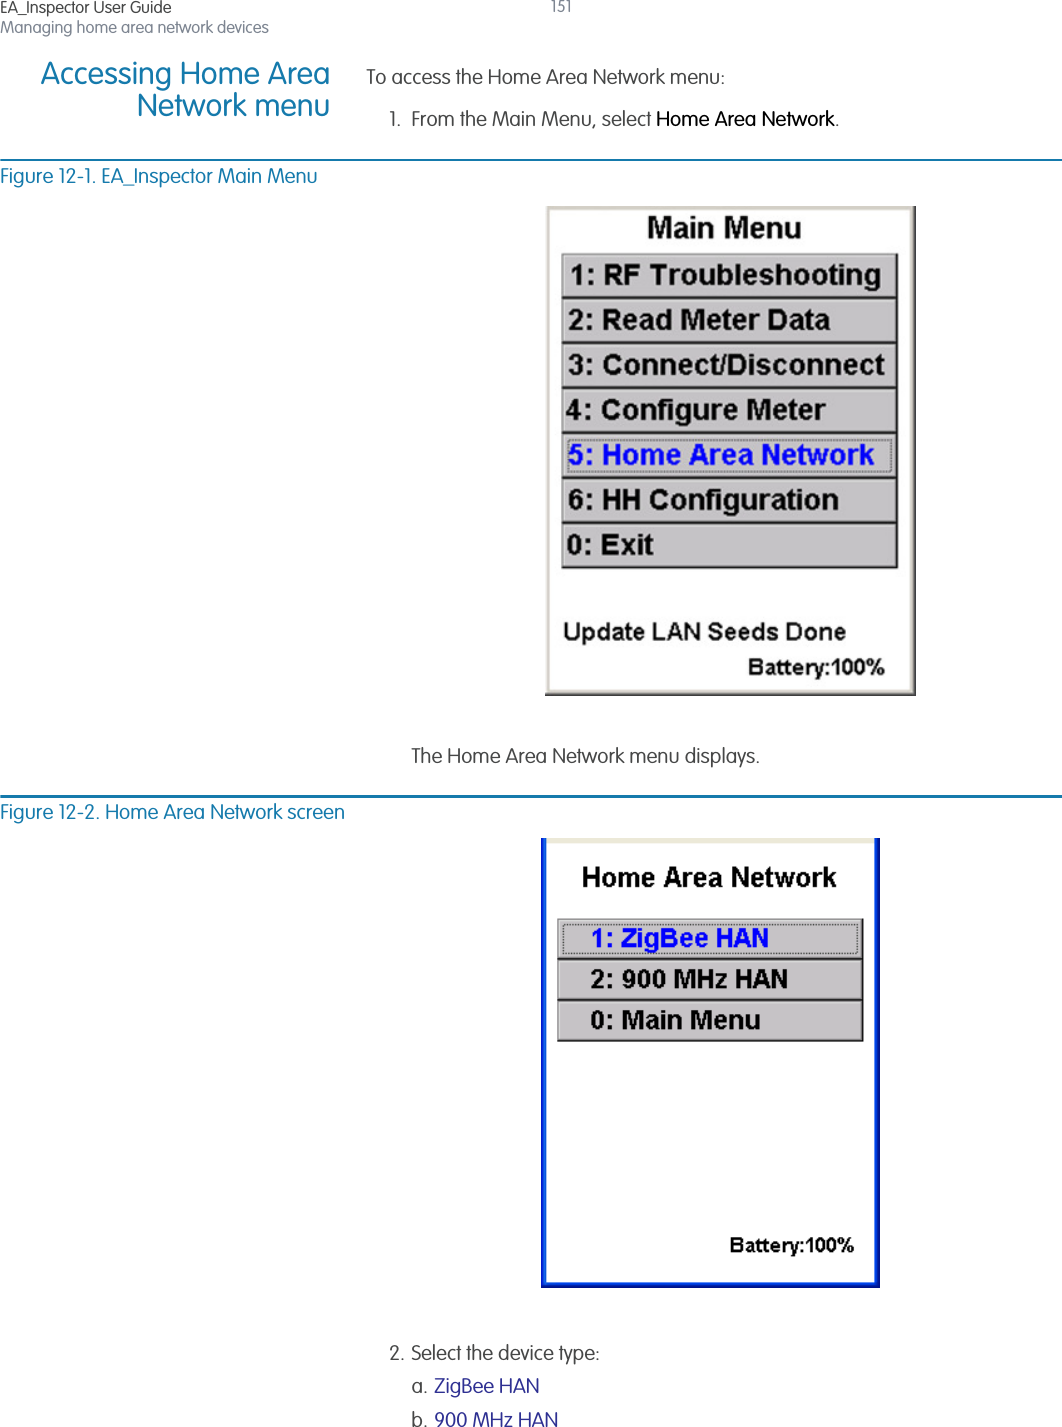 EA_Inspector User GuideManaging home area network devices151Accessing Home AreaNetwork menuTo access the Home Area Network menu:1. From the Main Menu, select Home Area Network.Figure 12-1. EA_Inspector Main MenuThe Home Area Network menu displays.Figure 12-2. Home Area Network screen2. Select the device type:a. ZigBee HAN b. 900 MHz HAN 